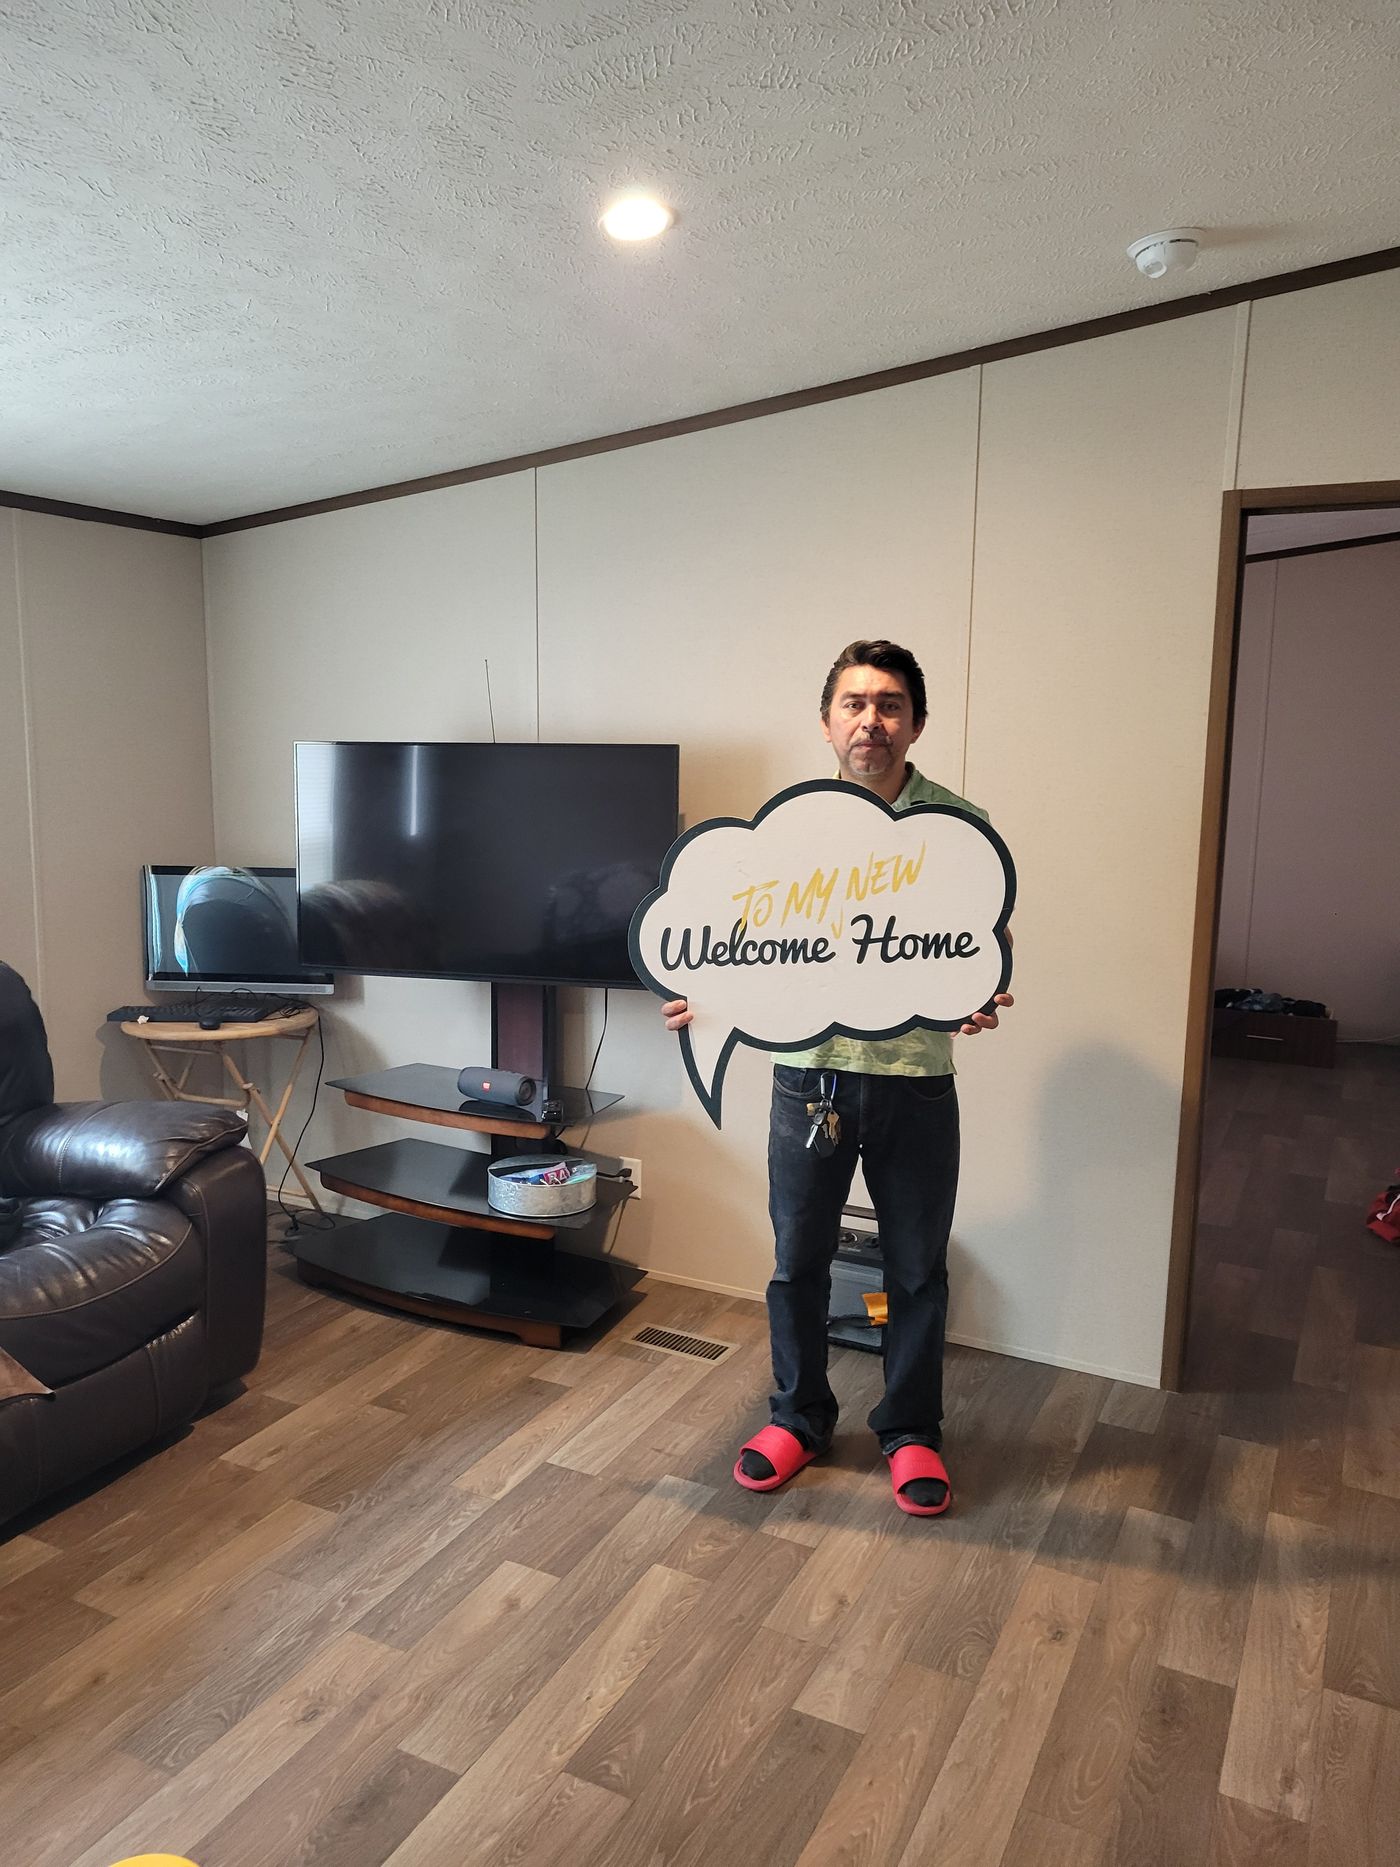 LUIS ALBERTO B. welcome home image